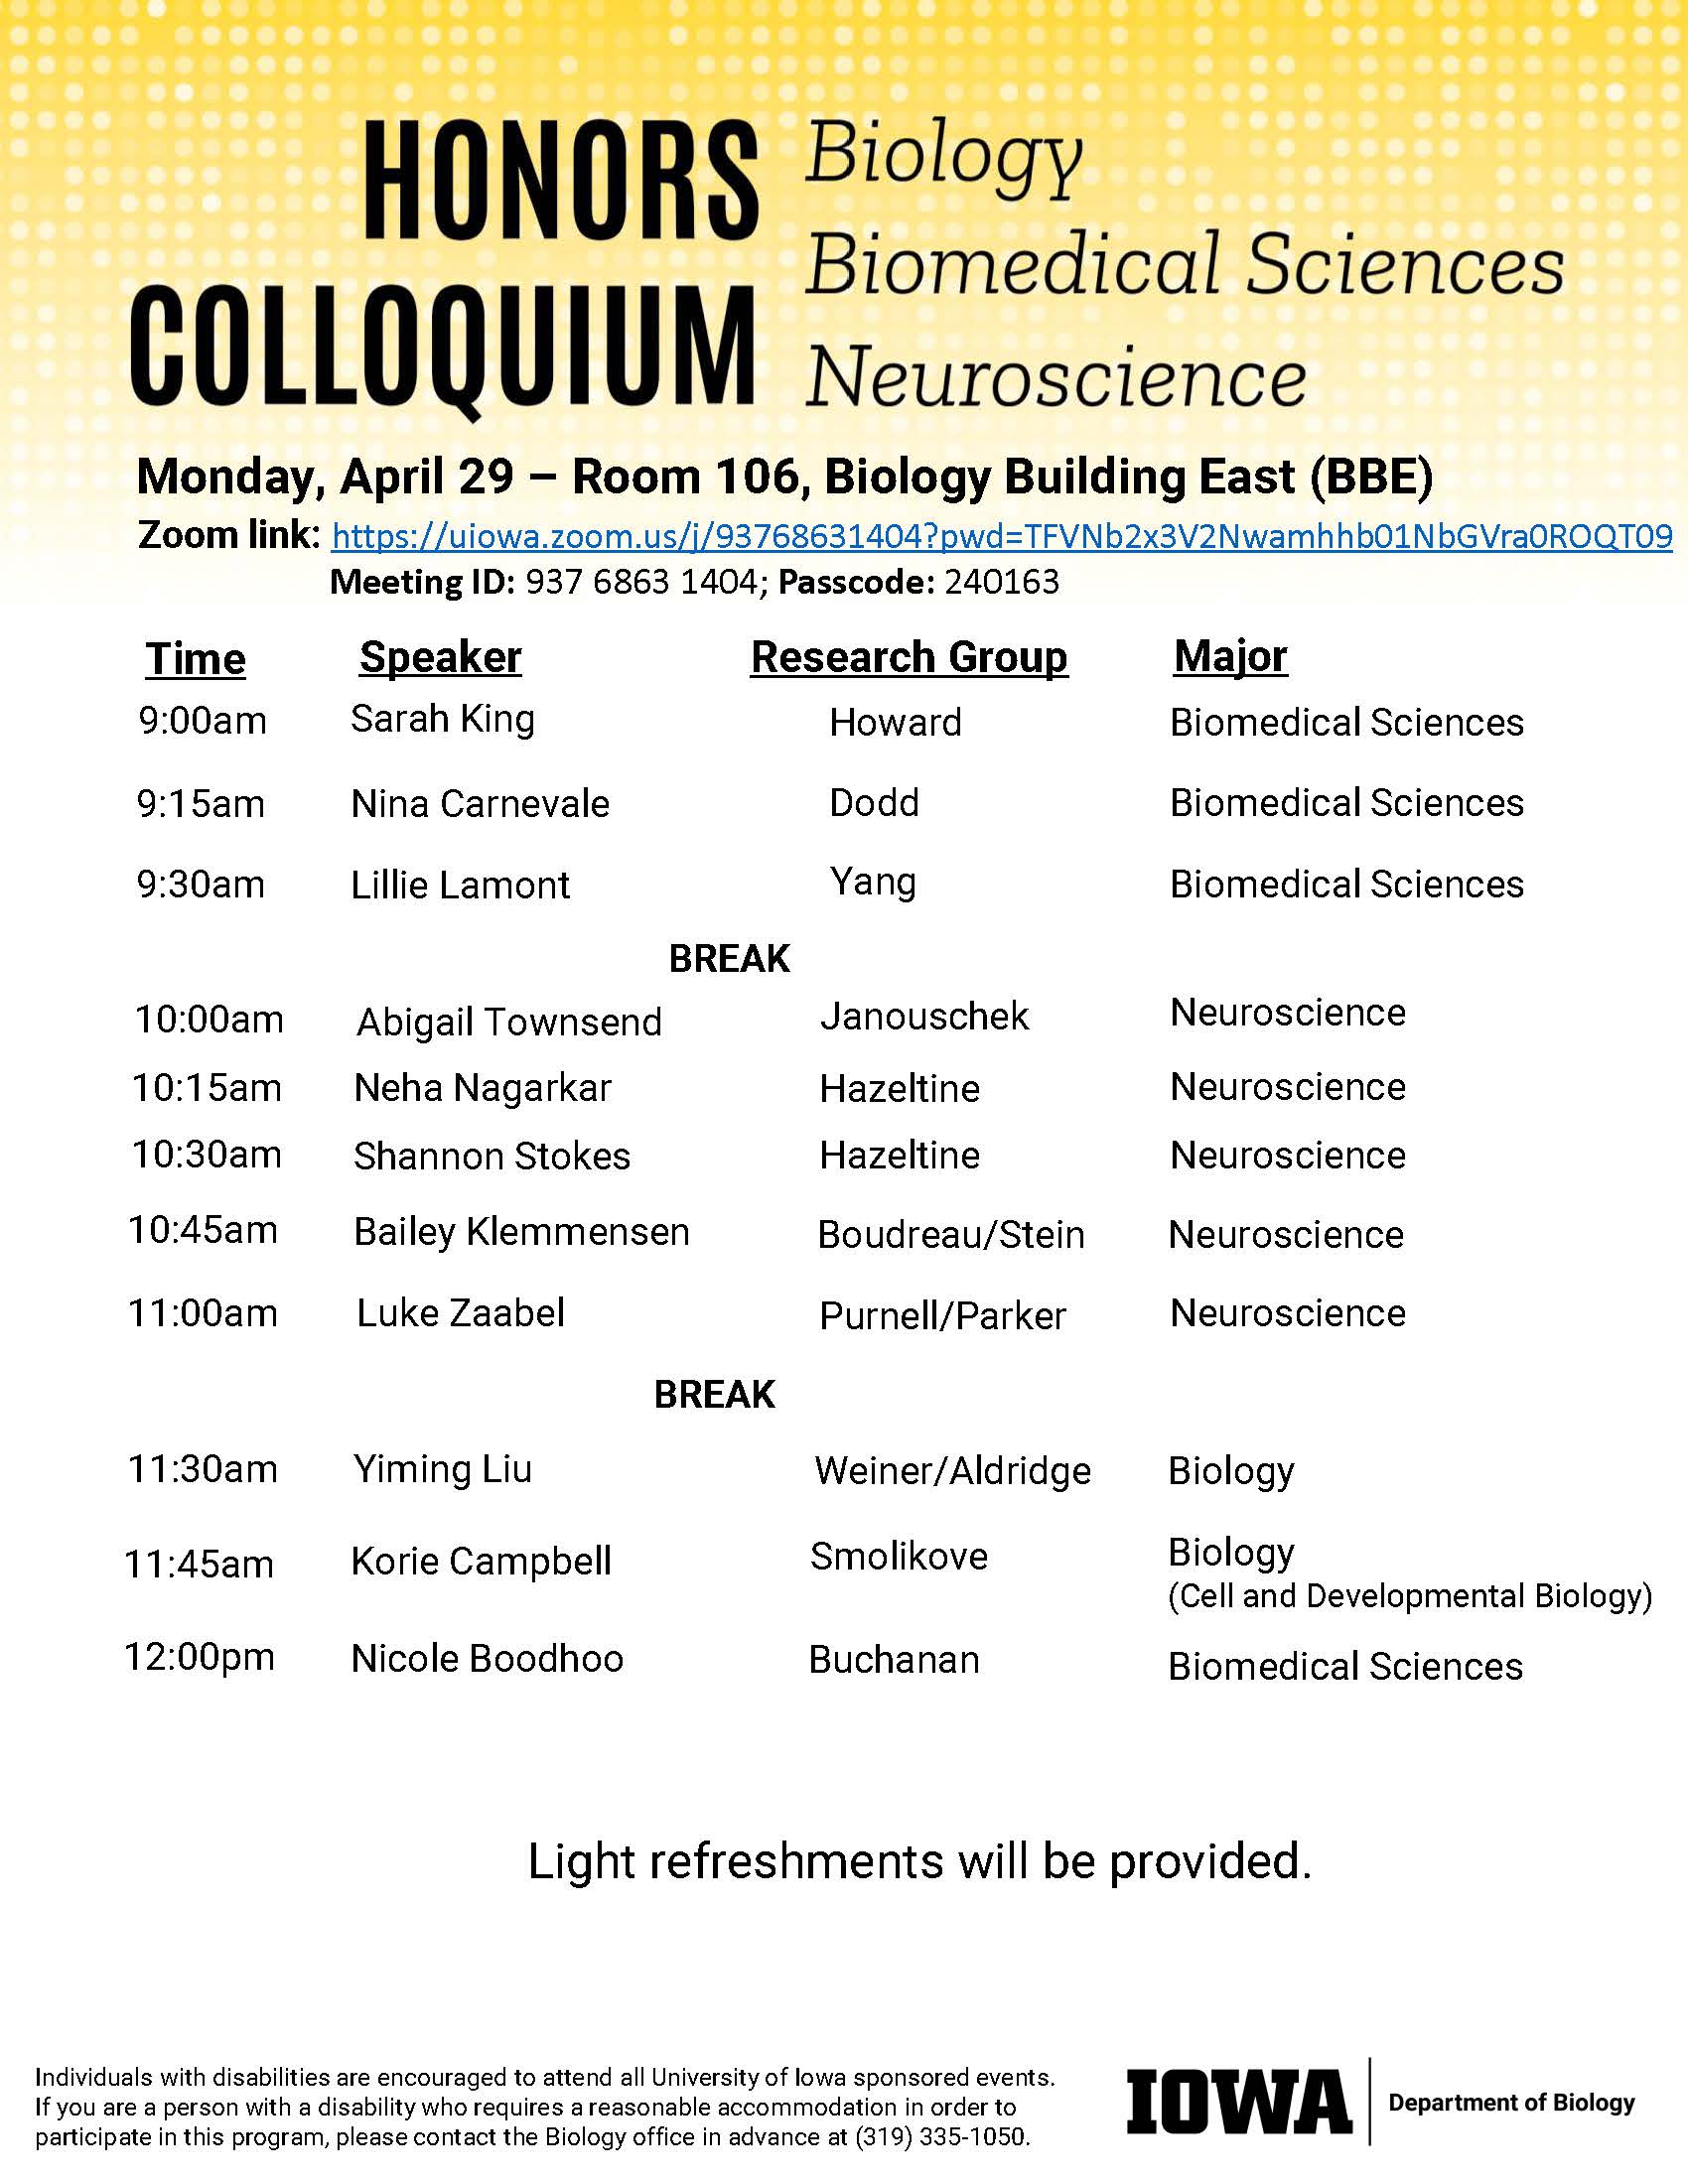 Department of Biology Honors Colloquium on Monday, April 29 in Room 106 BBE and via Zoom